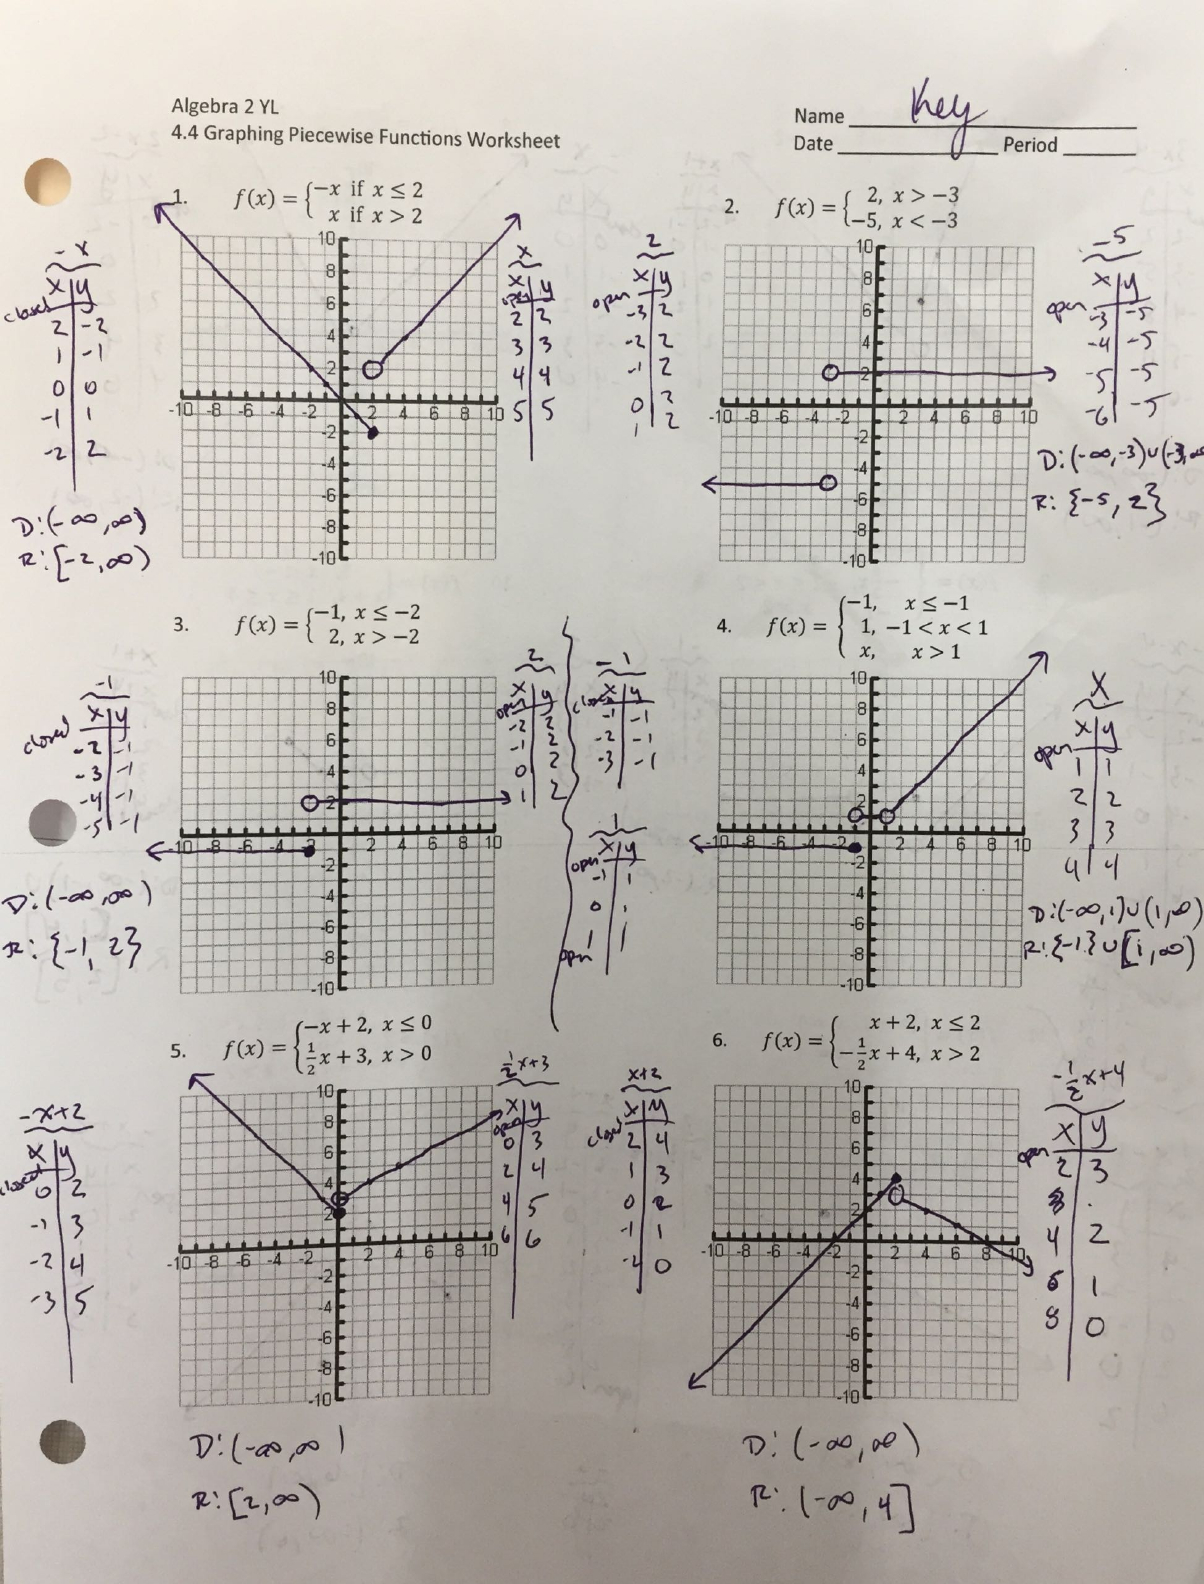 Algebra 2 Yl 44 Graphing Piecewise Functions 2 Yl 44 Graphing